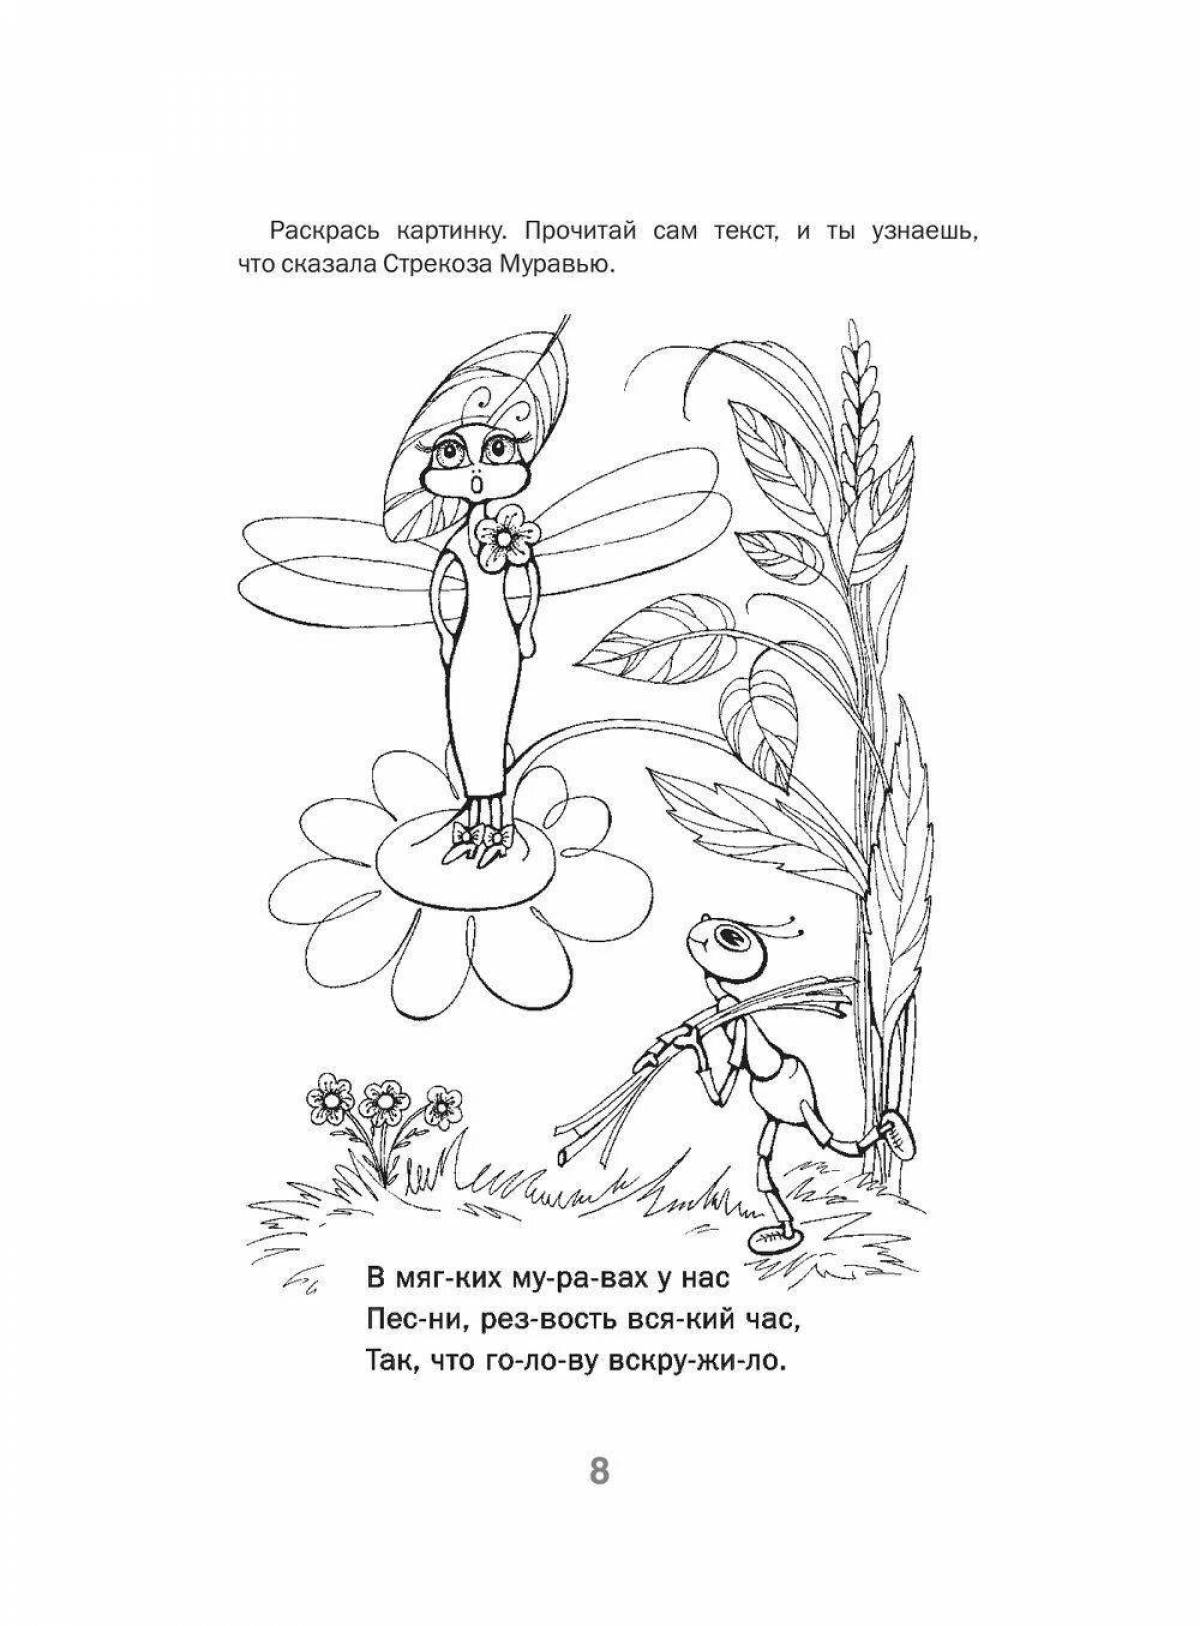 Amazing dragonfly and ant coloring book